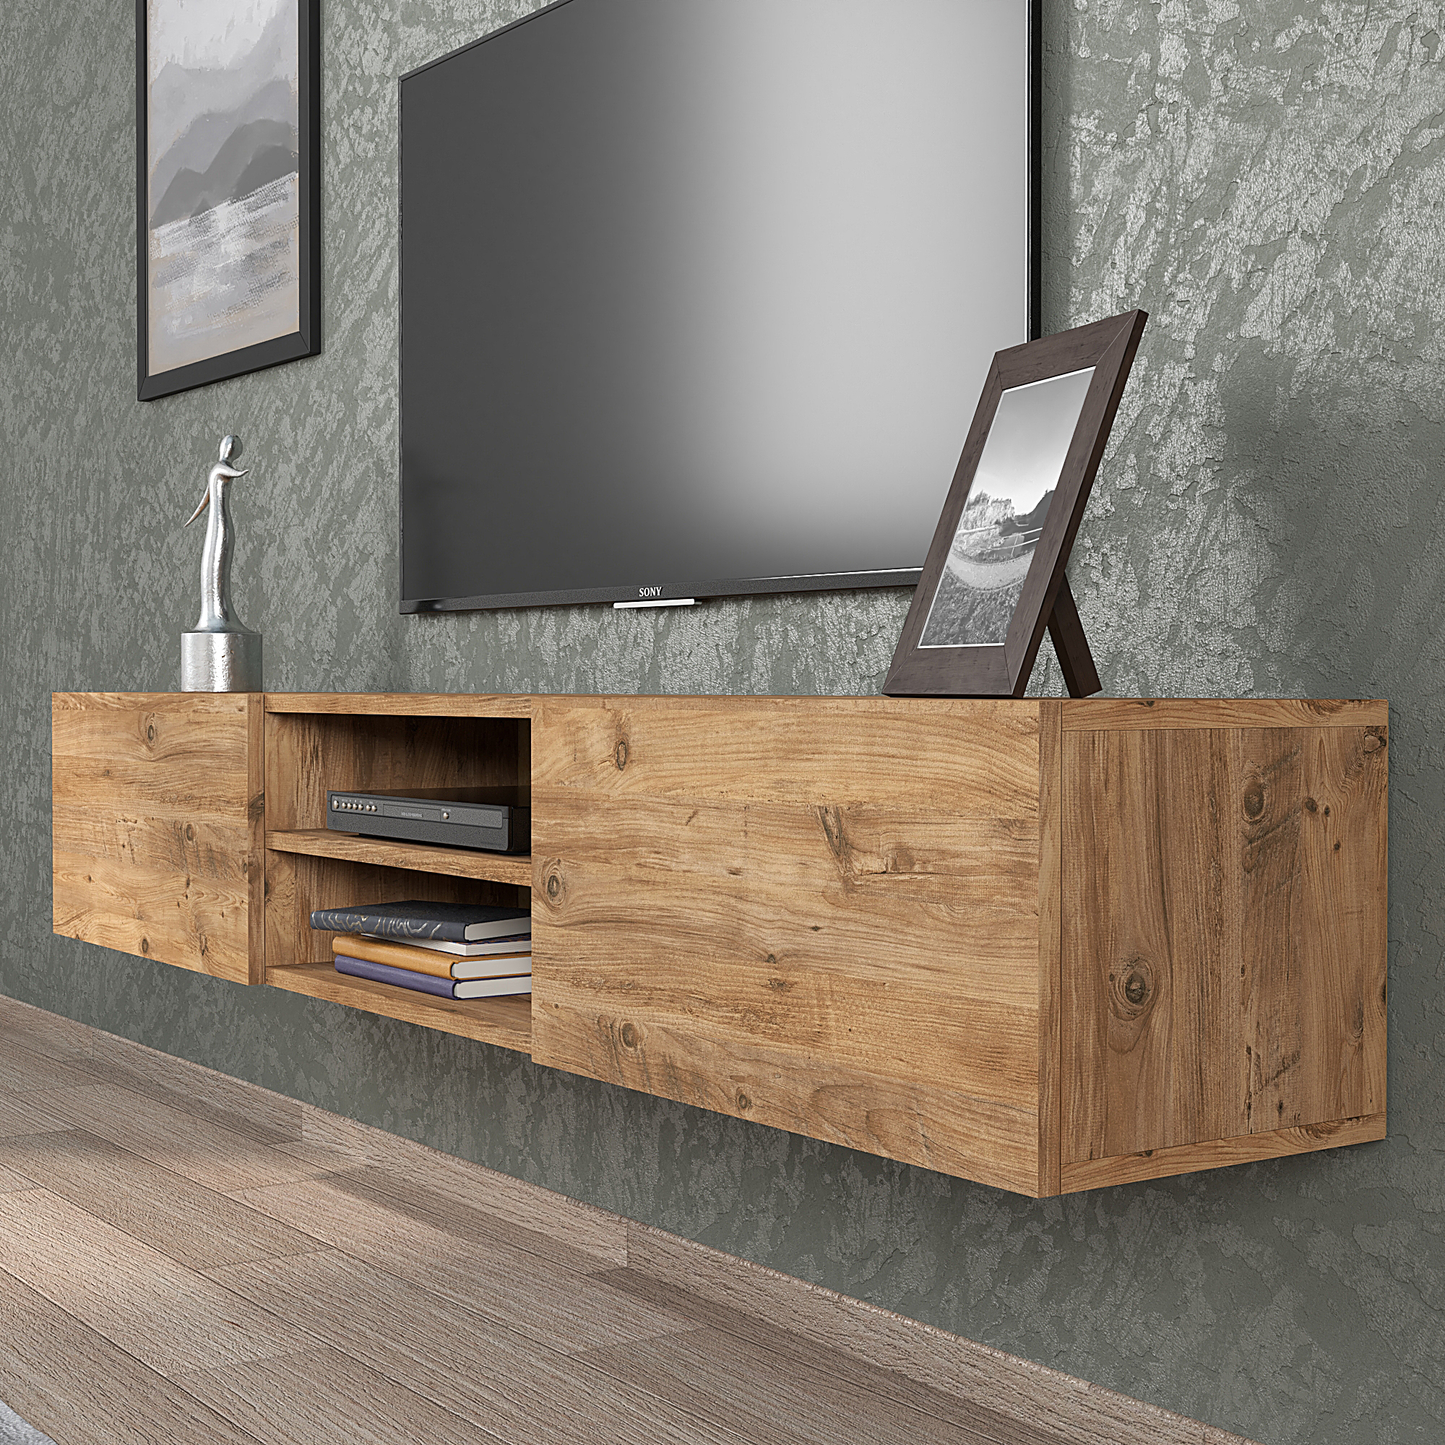 Otranto Floating TV Stand & Media Console for TVs up to 80" - Atlantic Pine Color